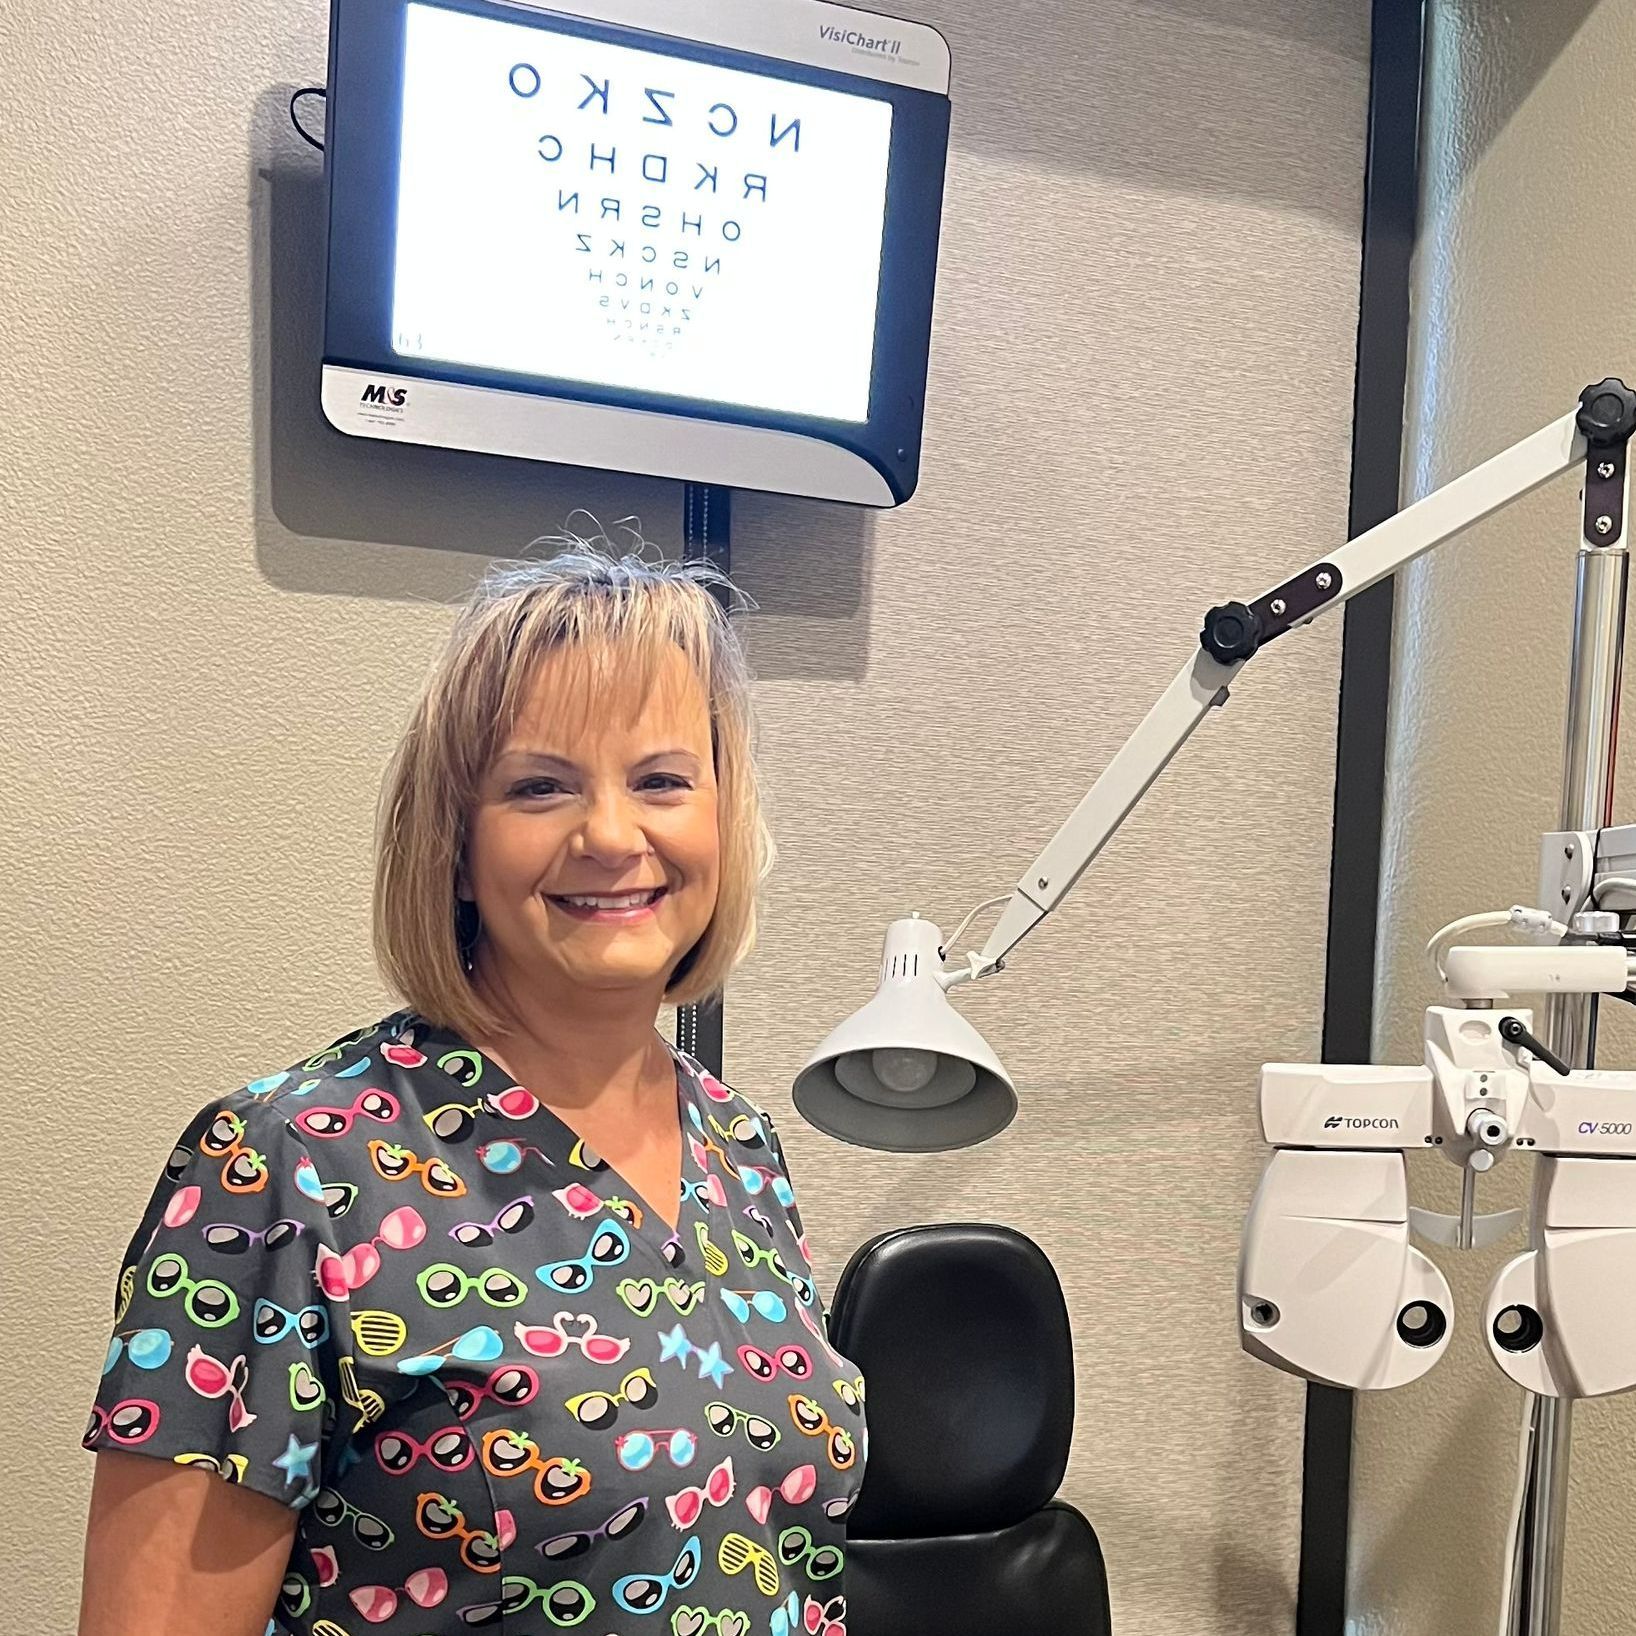 Dr. Tanya Markis | Grass Valley, CA | Grass Valley Eyecare Optometric Inc.